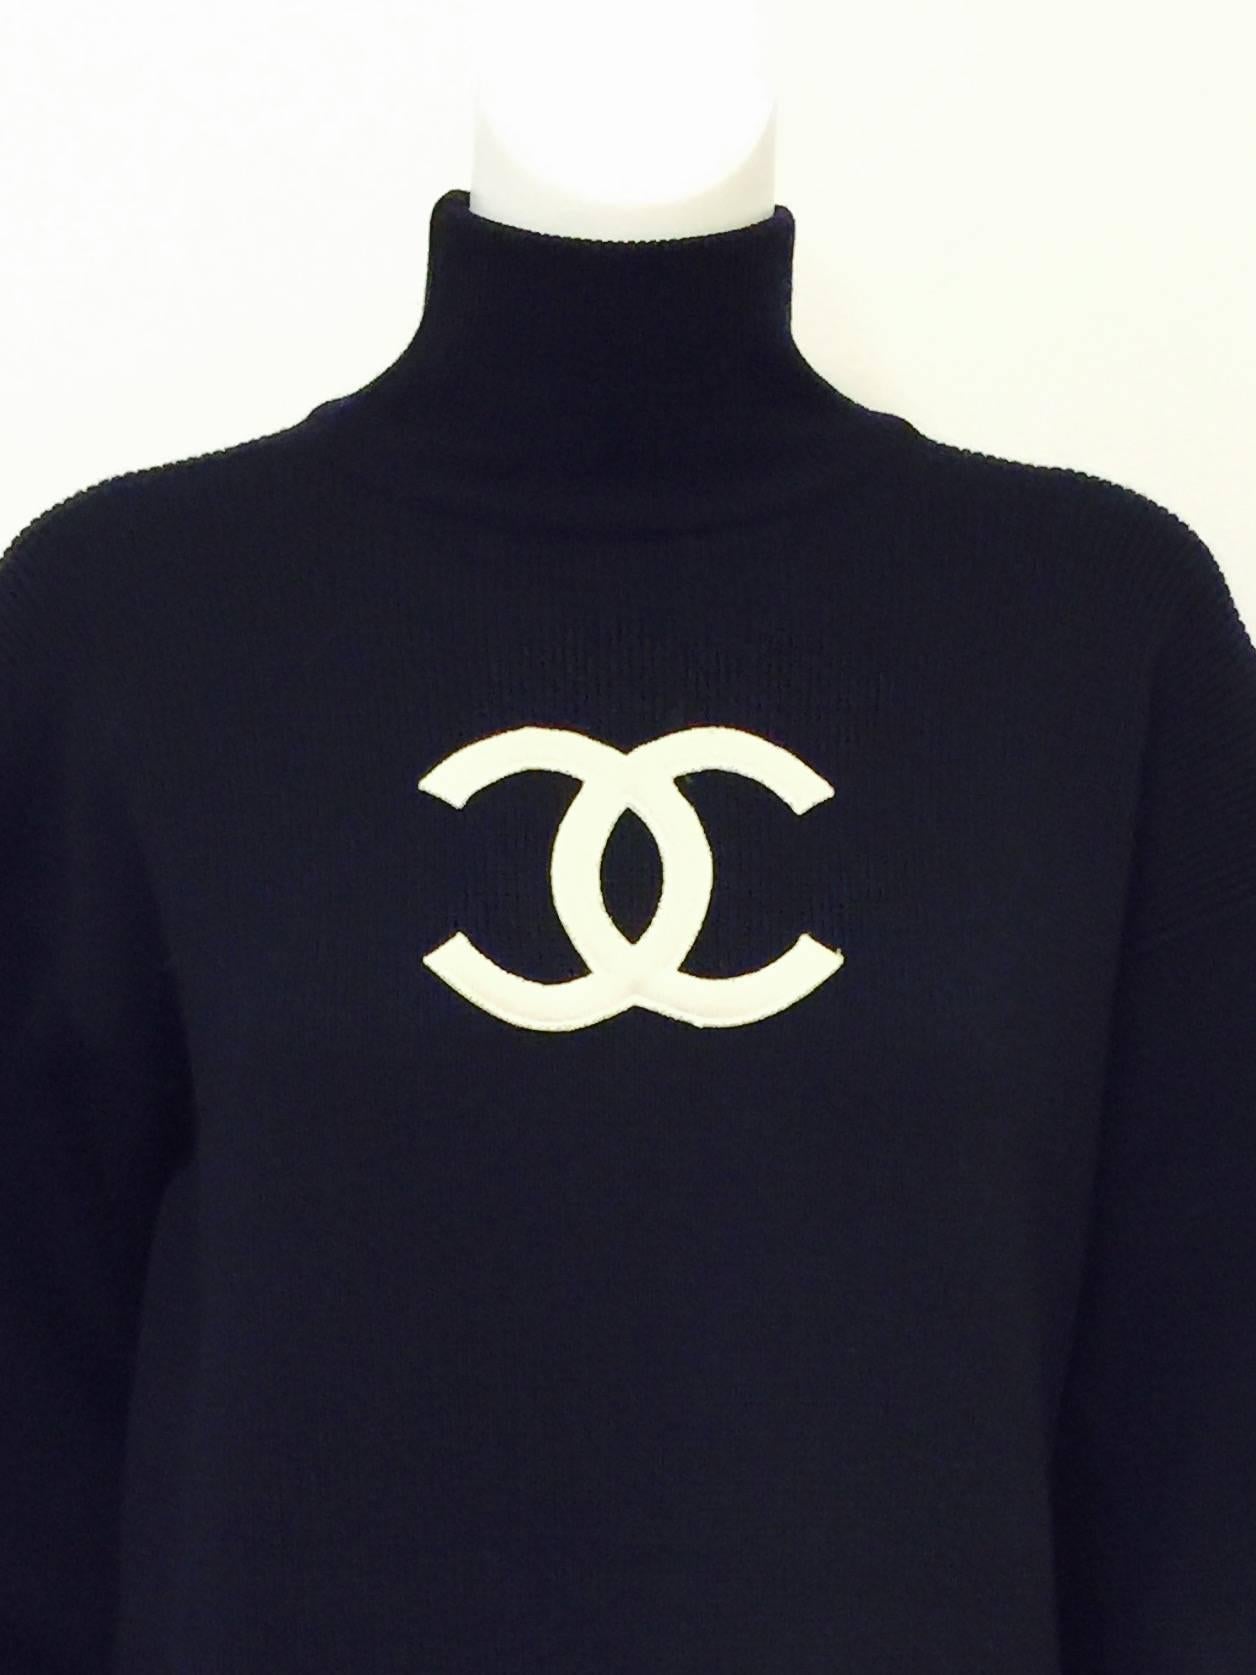 Chanel Navy Blue Wool Varsity Pullover Sweater Dress is rare and highly coveted by collectors of all things Coco!  Reminiscent of the sweaters that star athletes proudly wore at prestigious colleges and universities during the first half of the 20th